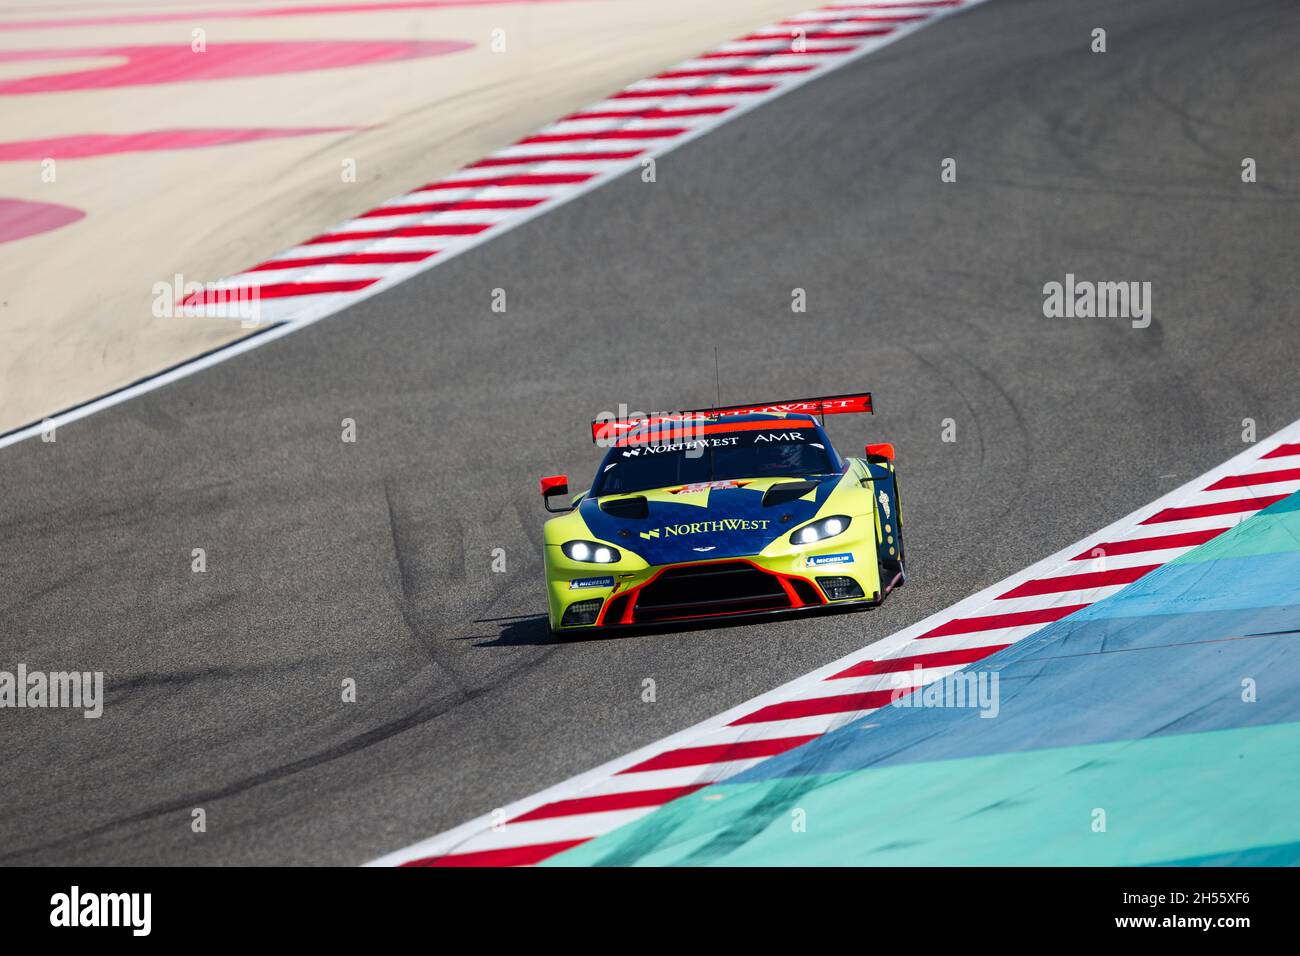 2 - Aston Martin High Resolution Stock Photography and Images - Alamy